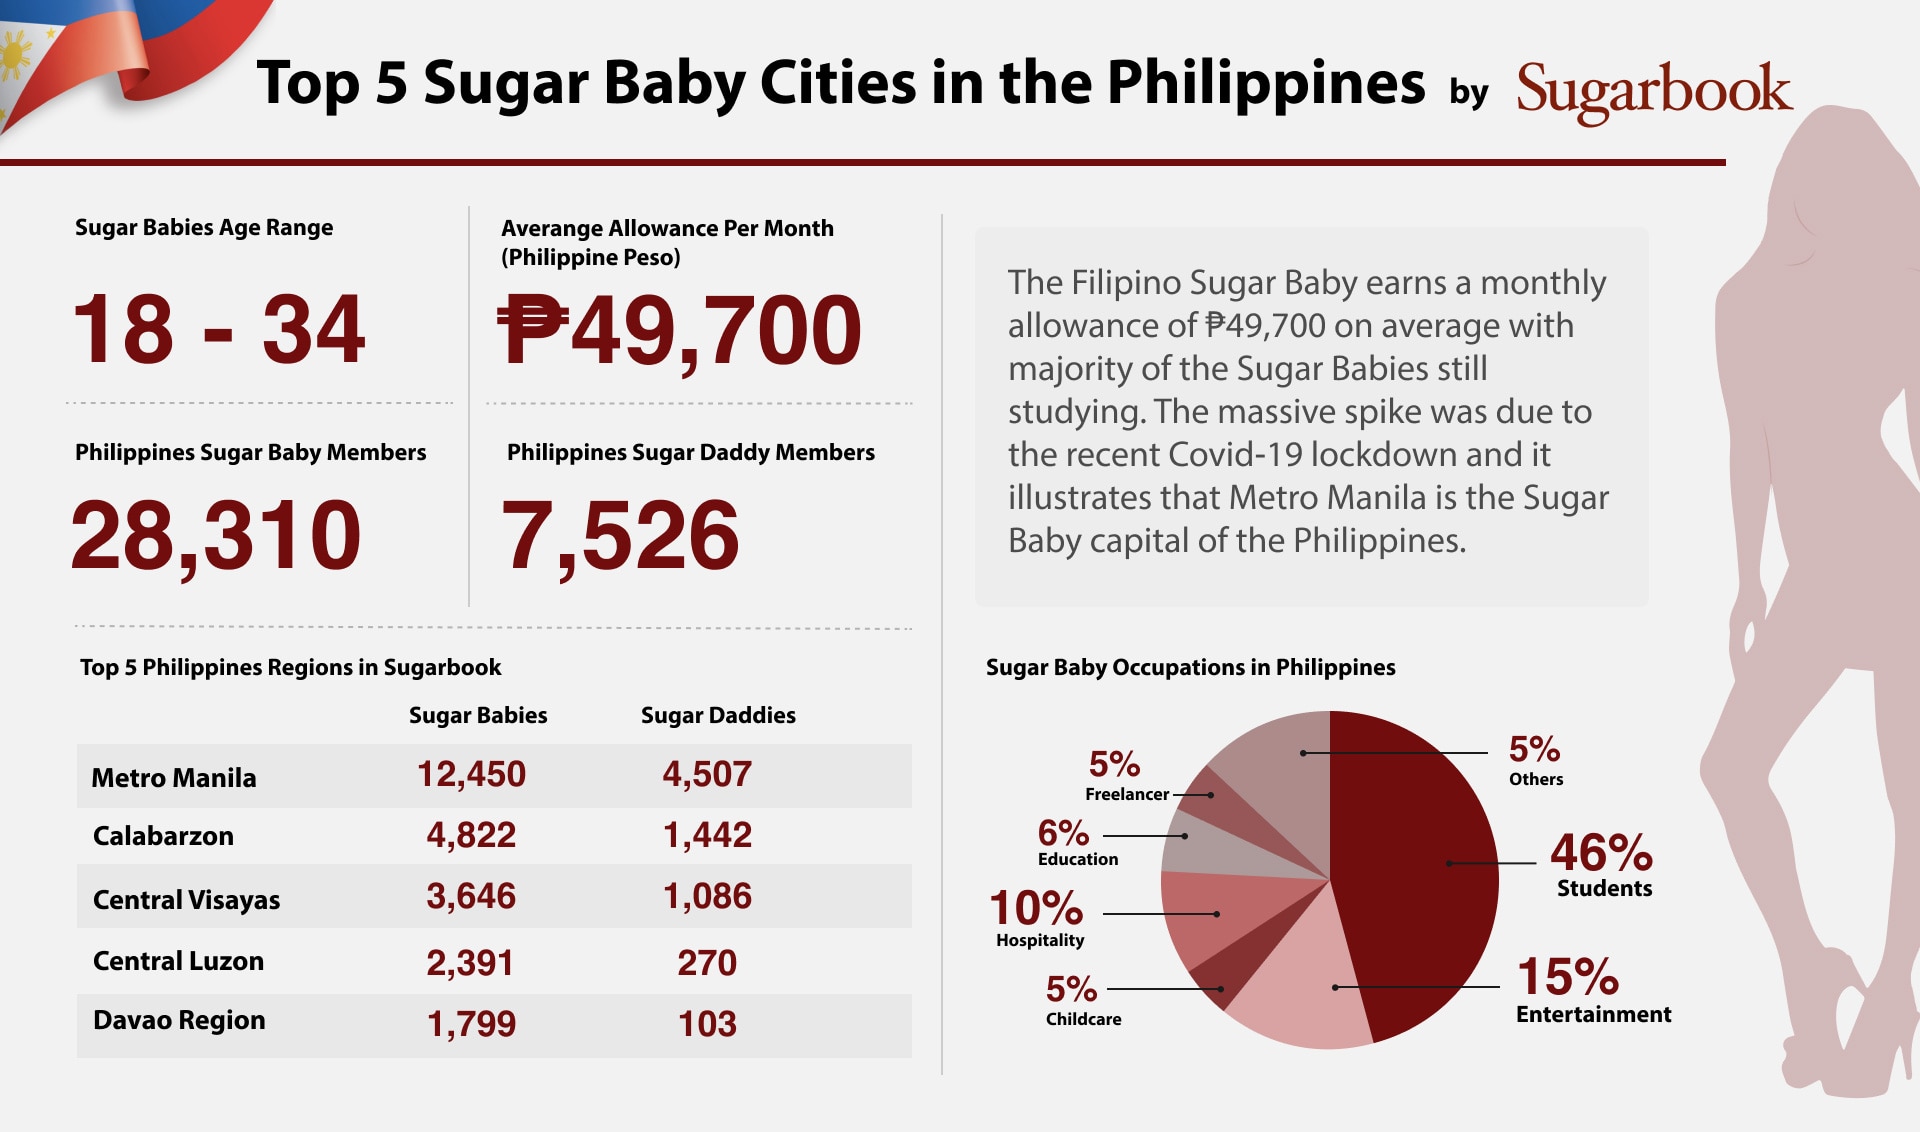 Dangerous or empowering? Signups on sugar daddy dating site rise among young women in PH amid pandemic 2